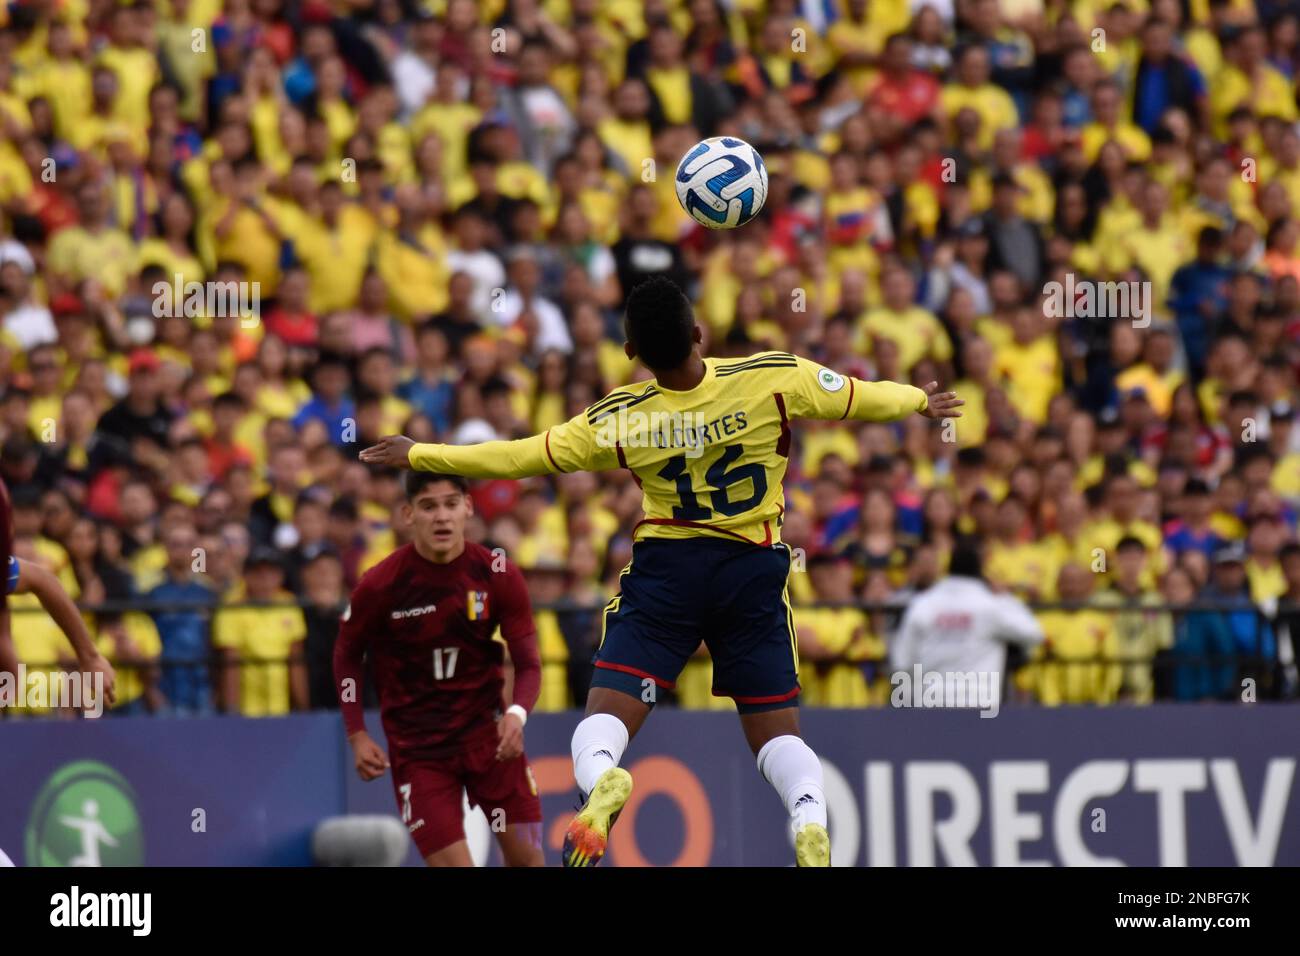 Bogota, Colombia on February 12, 2023. Colombia's Oscar Cortes during the South American U-20 Conmebol Tournament match between Colombia and Venezuela, in Bogota, Colombia on February 12, 2023. Photo by: Cristian Bayona/Long Visual Press Stock Photo